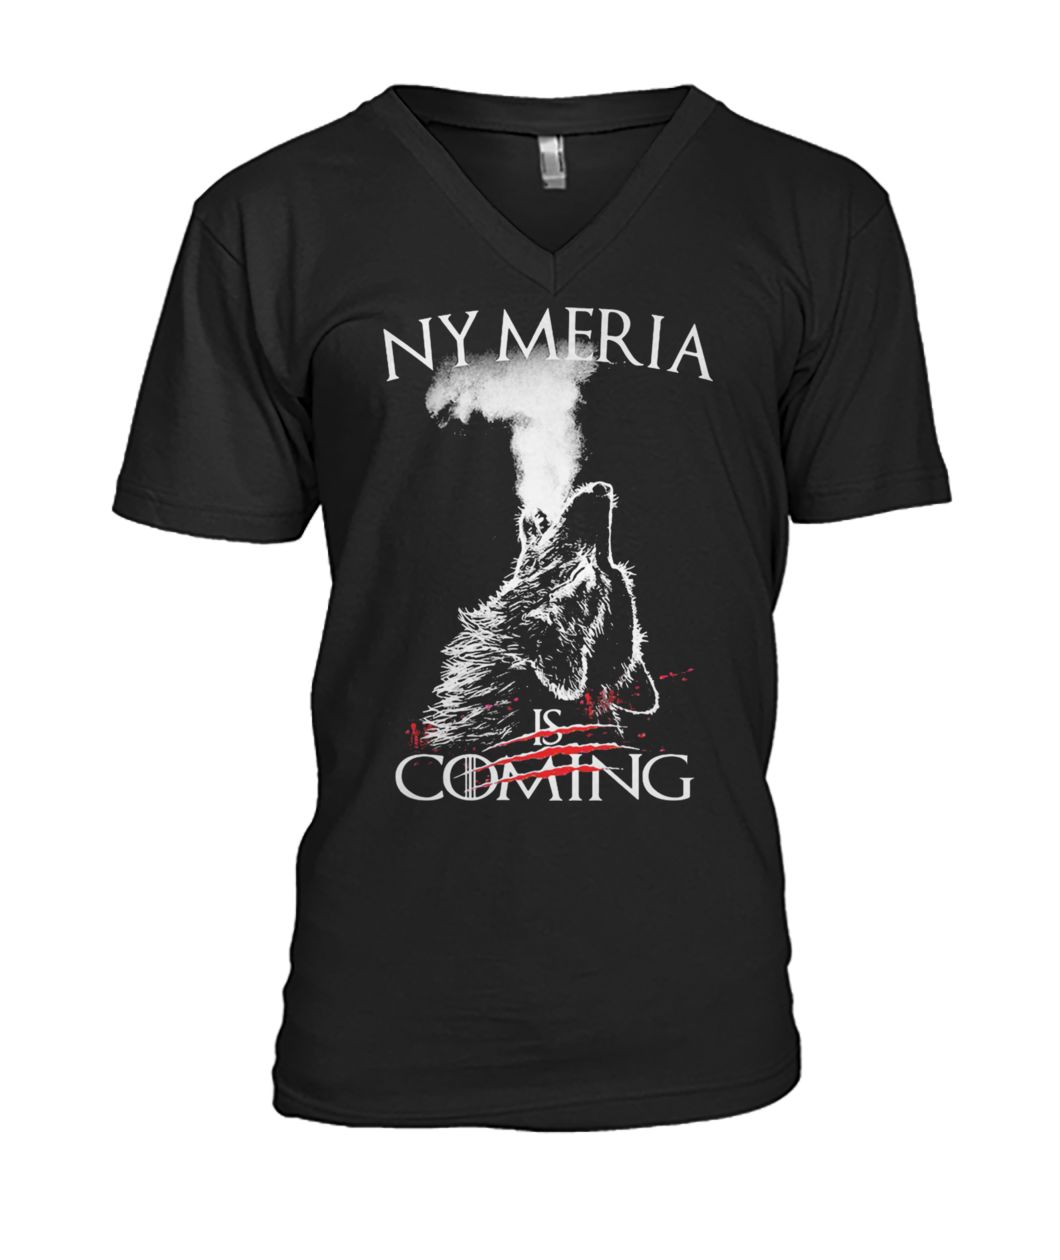 Nymeria is coming game of thrones mens v-neck